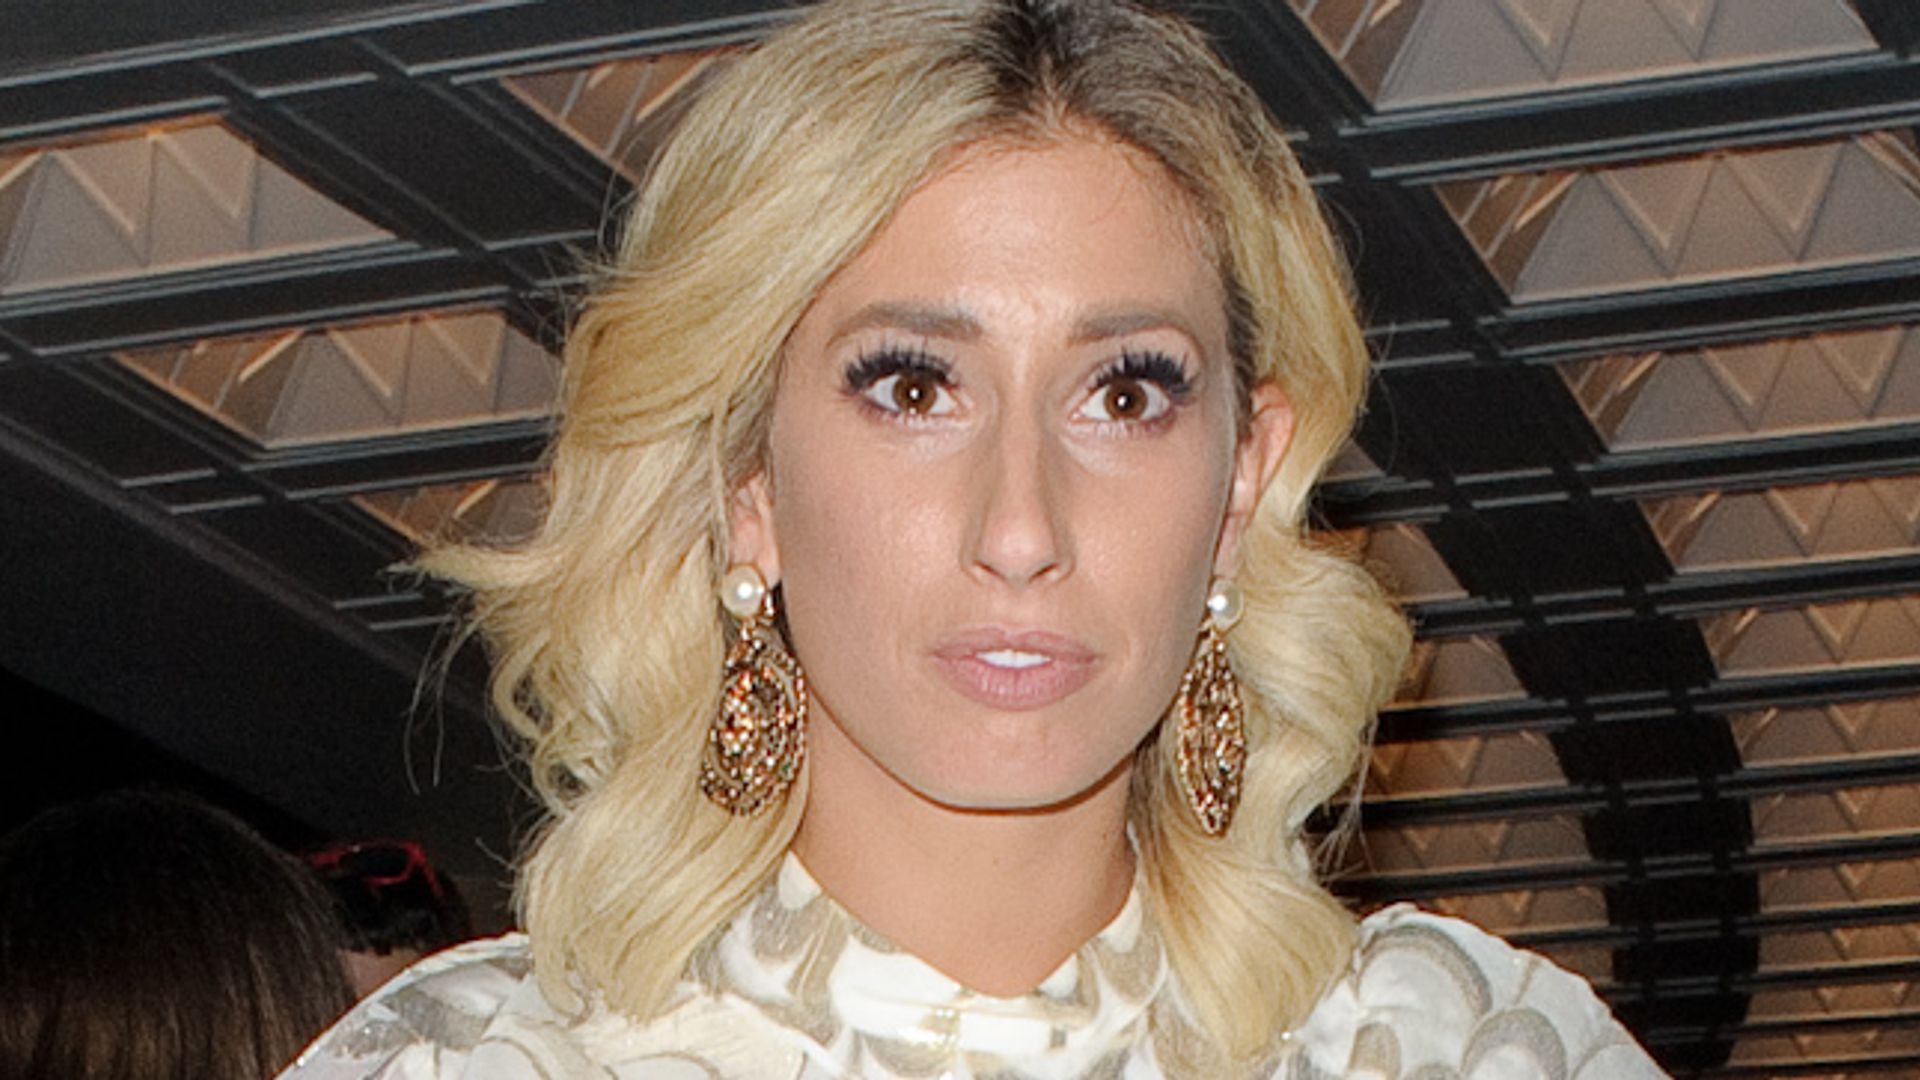 Stacey Solomon in a white dress and gold earrings at the TV Choice awards in 2017